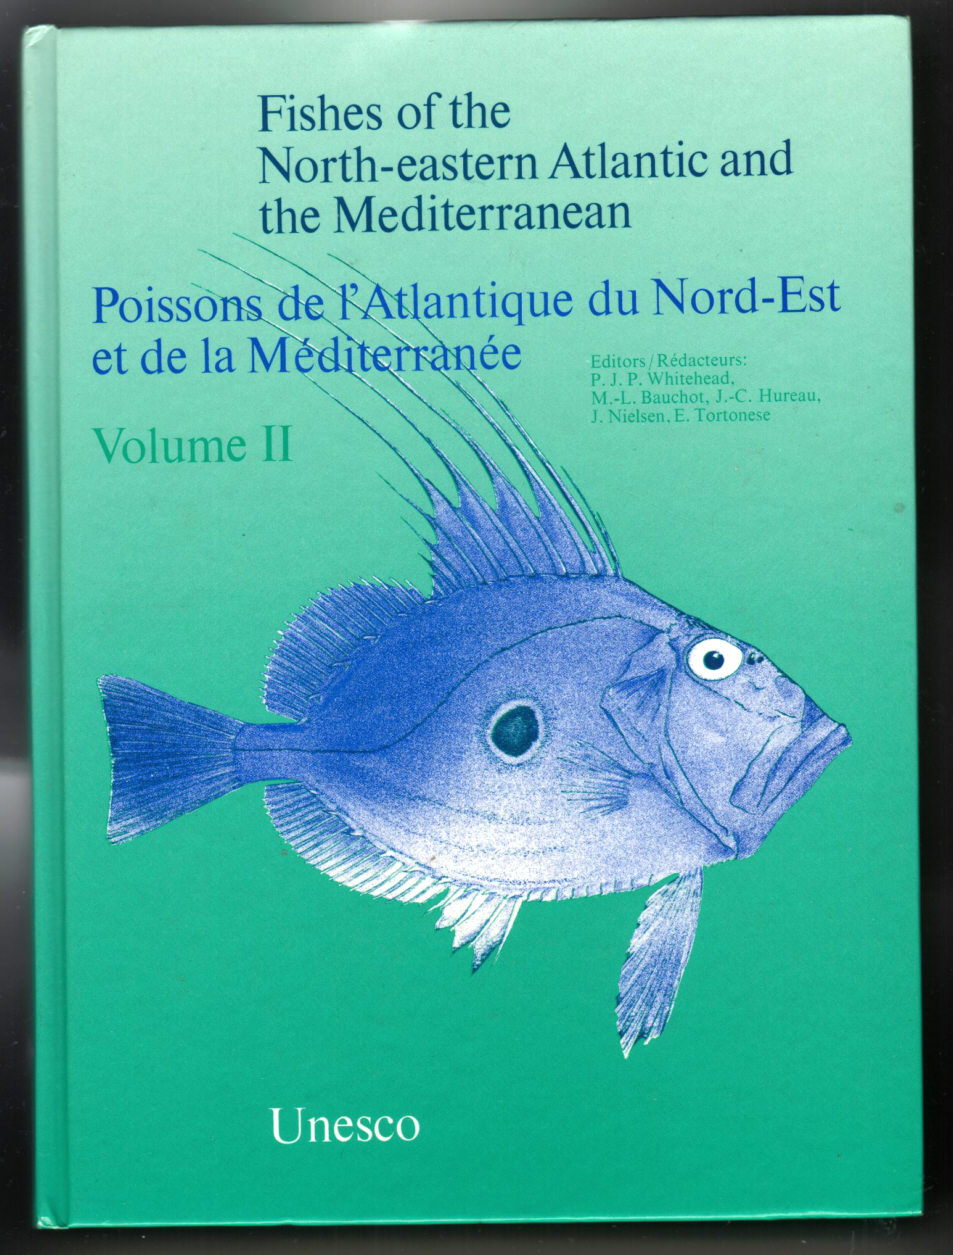 Fishes of the Estern North Atlantic and the Mediterrnean